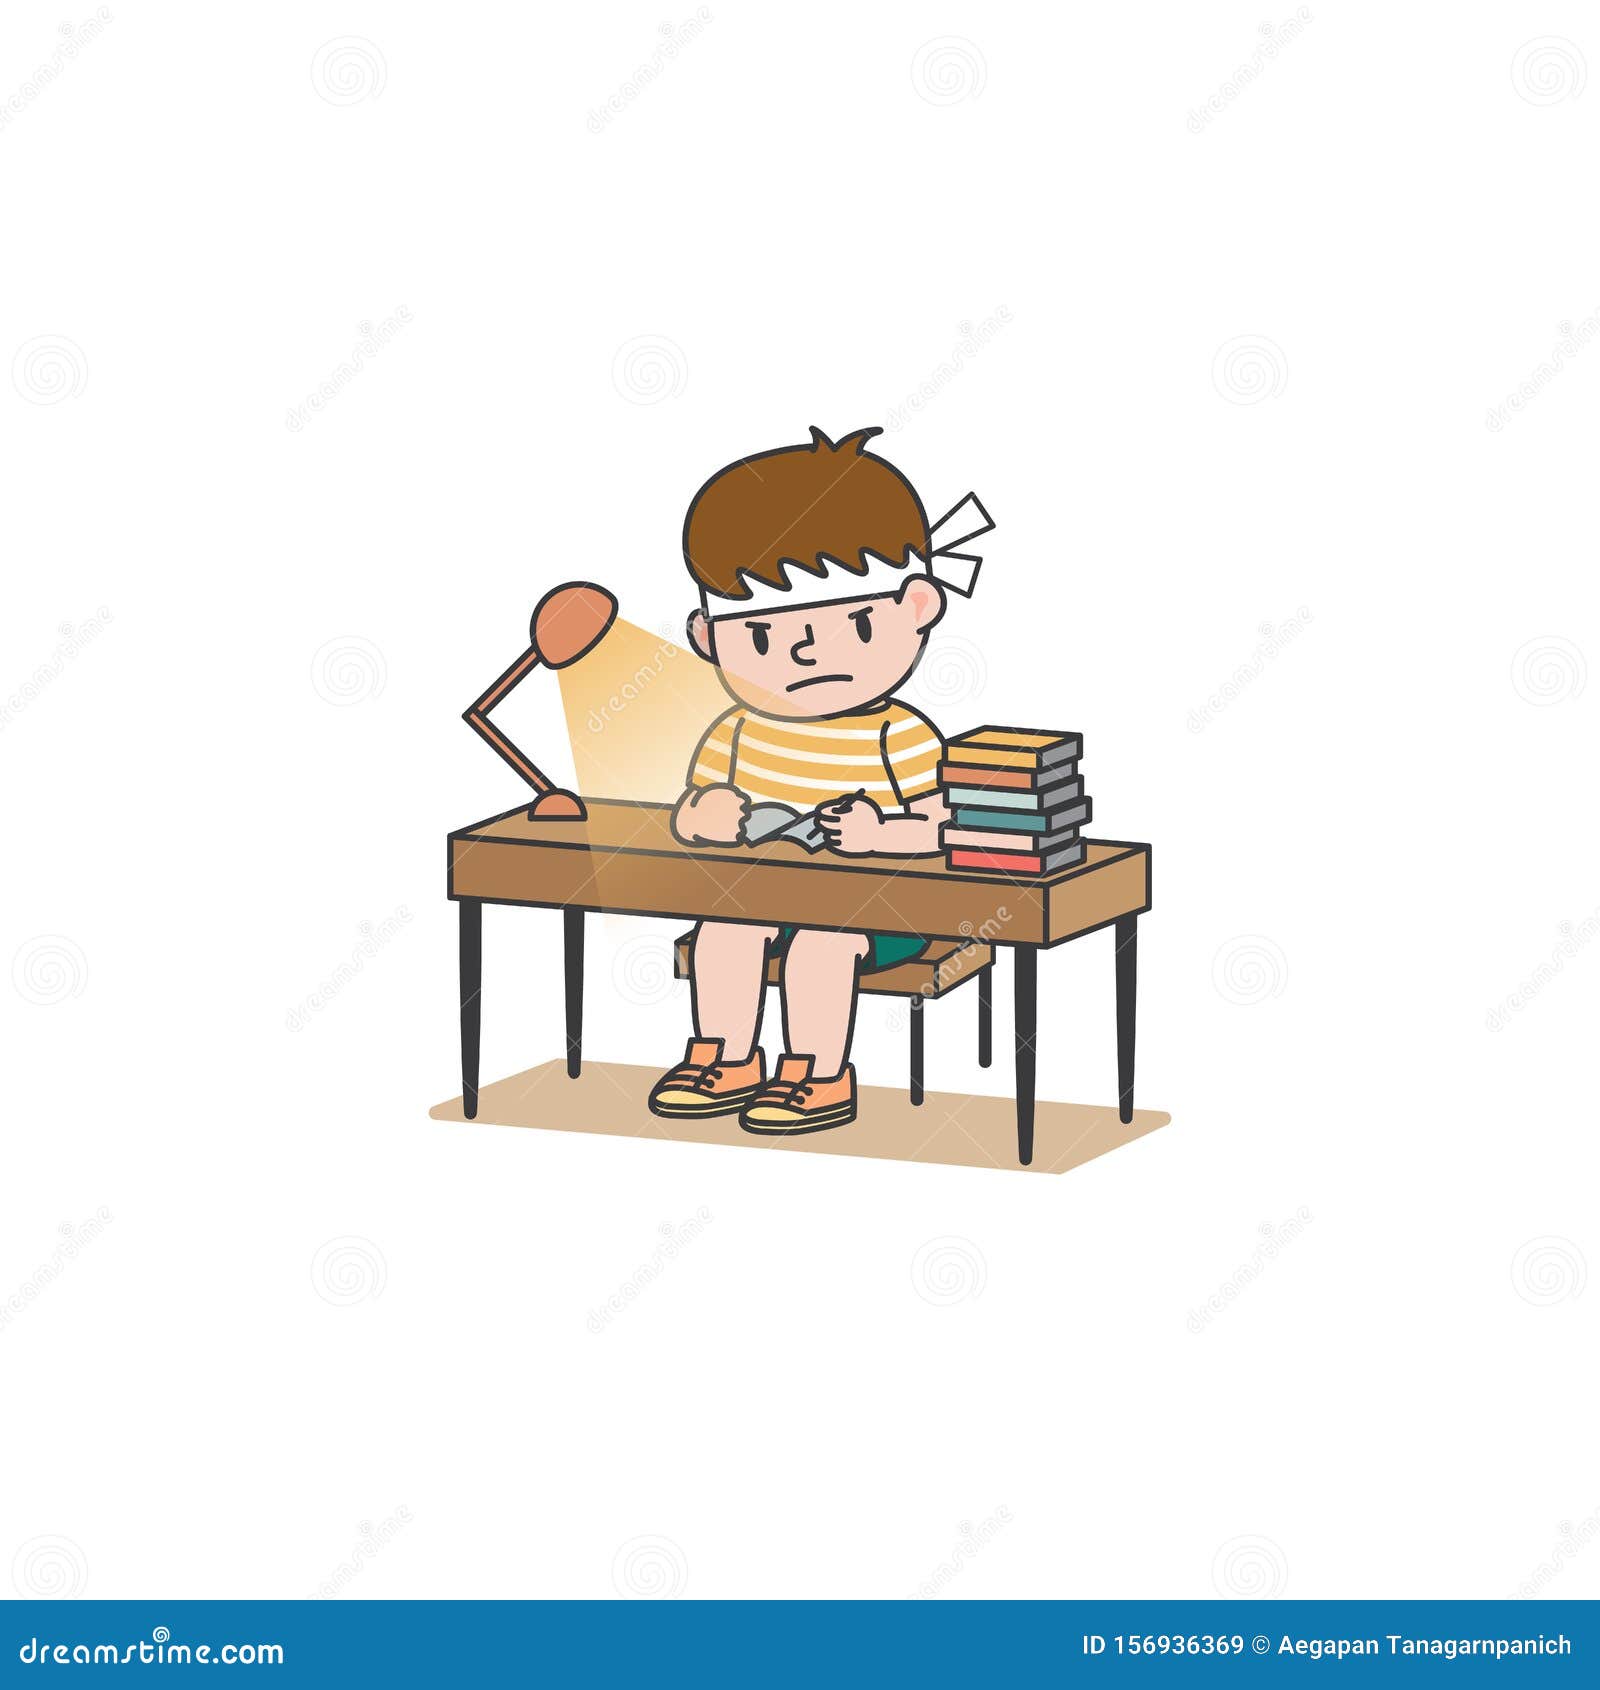 the student boy has studied hard and seriously and pile books and lamp on the desk   on white background.